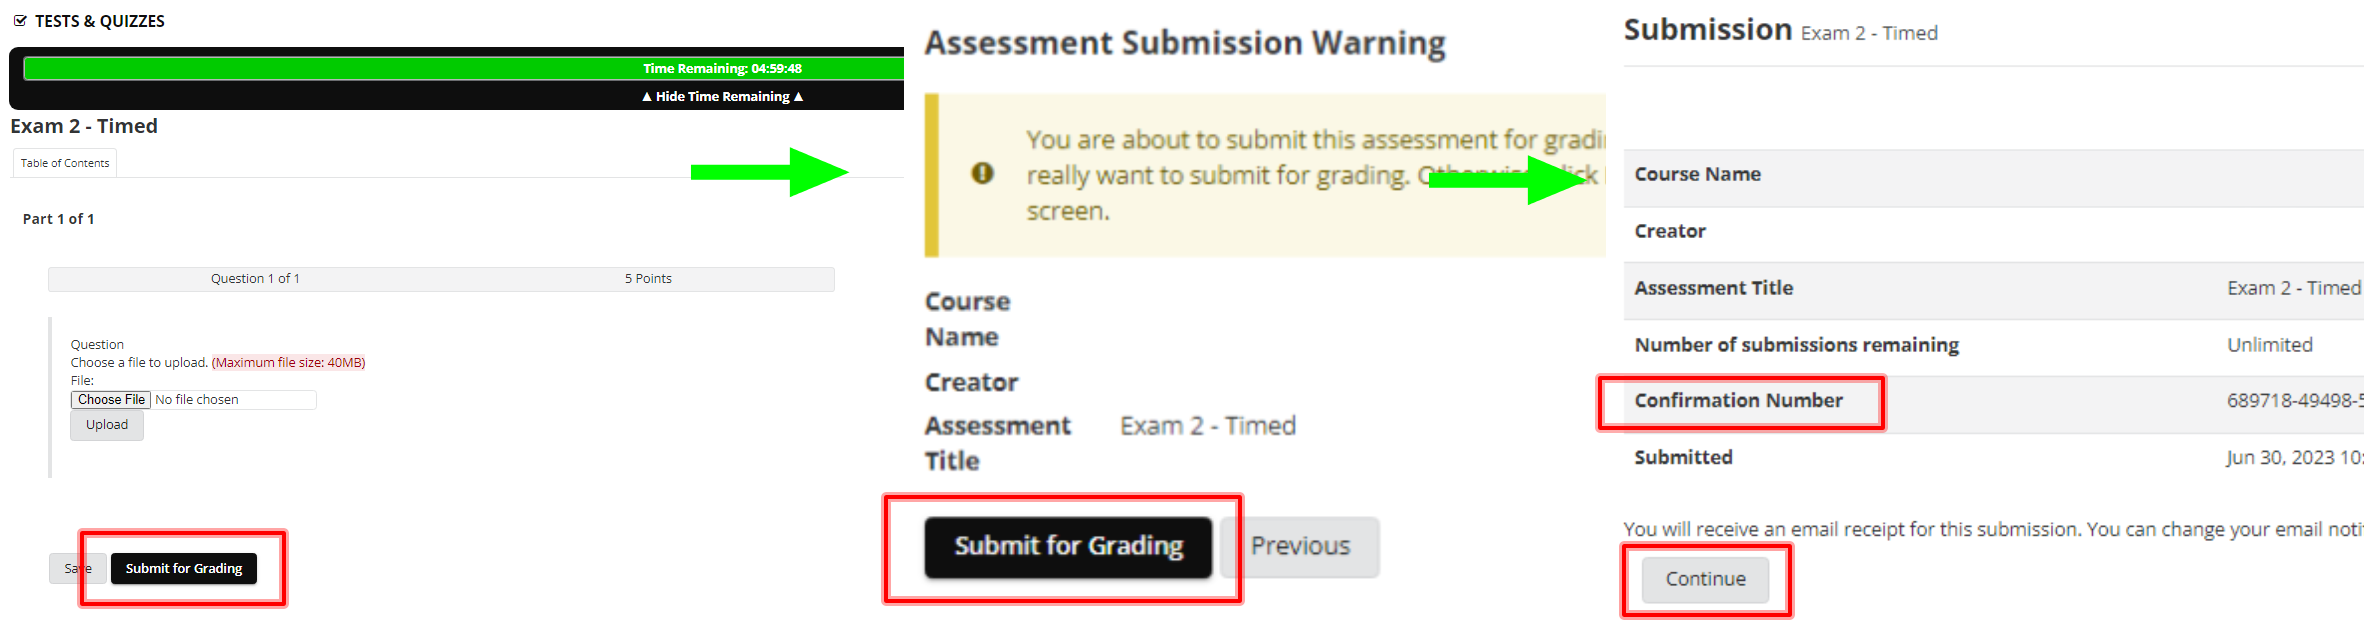 This image shows three screens: the final question page, the confirm submission page, and the successful submission page. Highlighted in the first screen is the submit for grading button. Highlighted in the second screen is the confirm submit for grading button. Highlighted in the third screen is the continue button once a confirmation number is received.